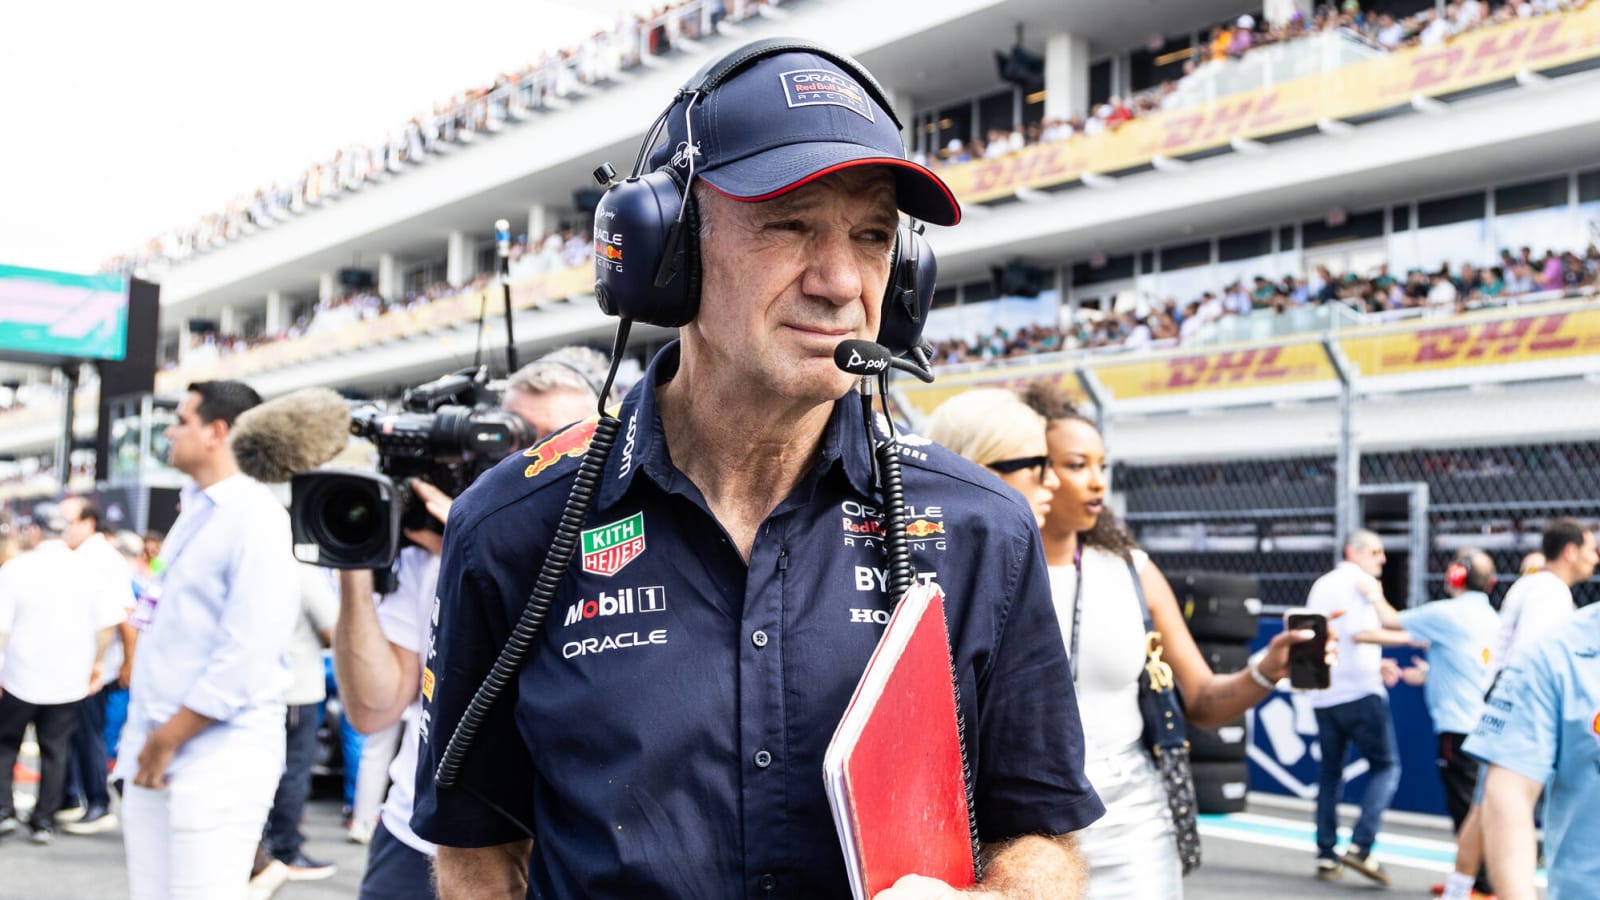 Christian Horner claims Red Bull ‘accommodated’ Adrian Newey’s way of working over the years